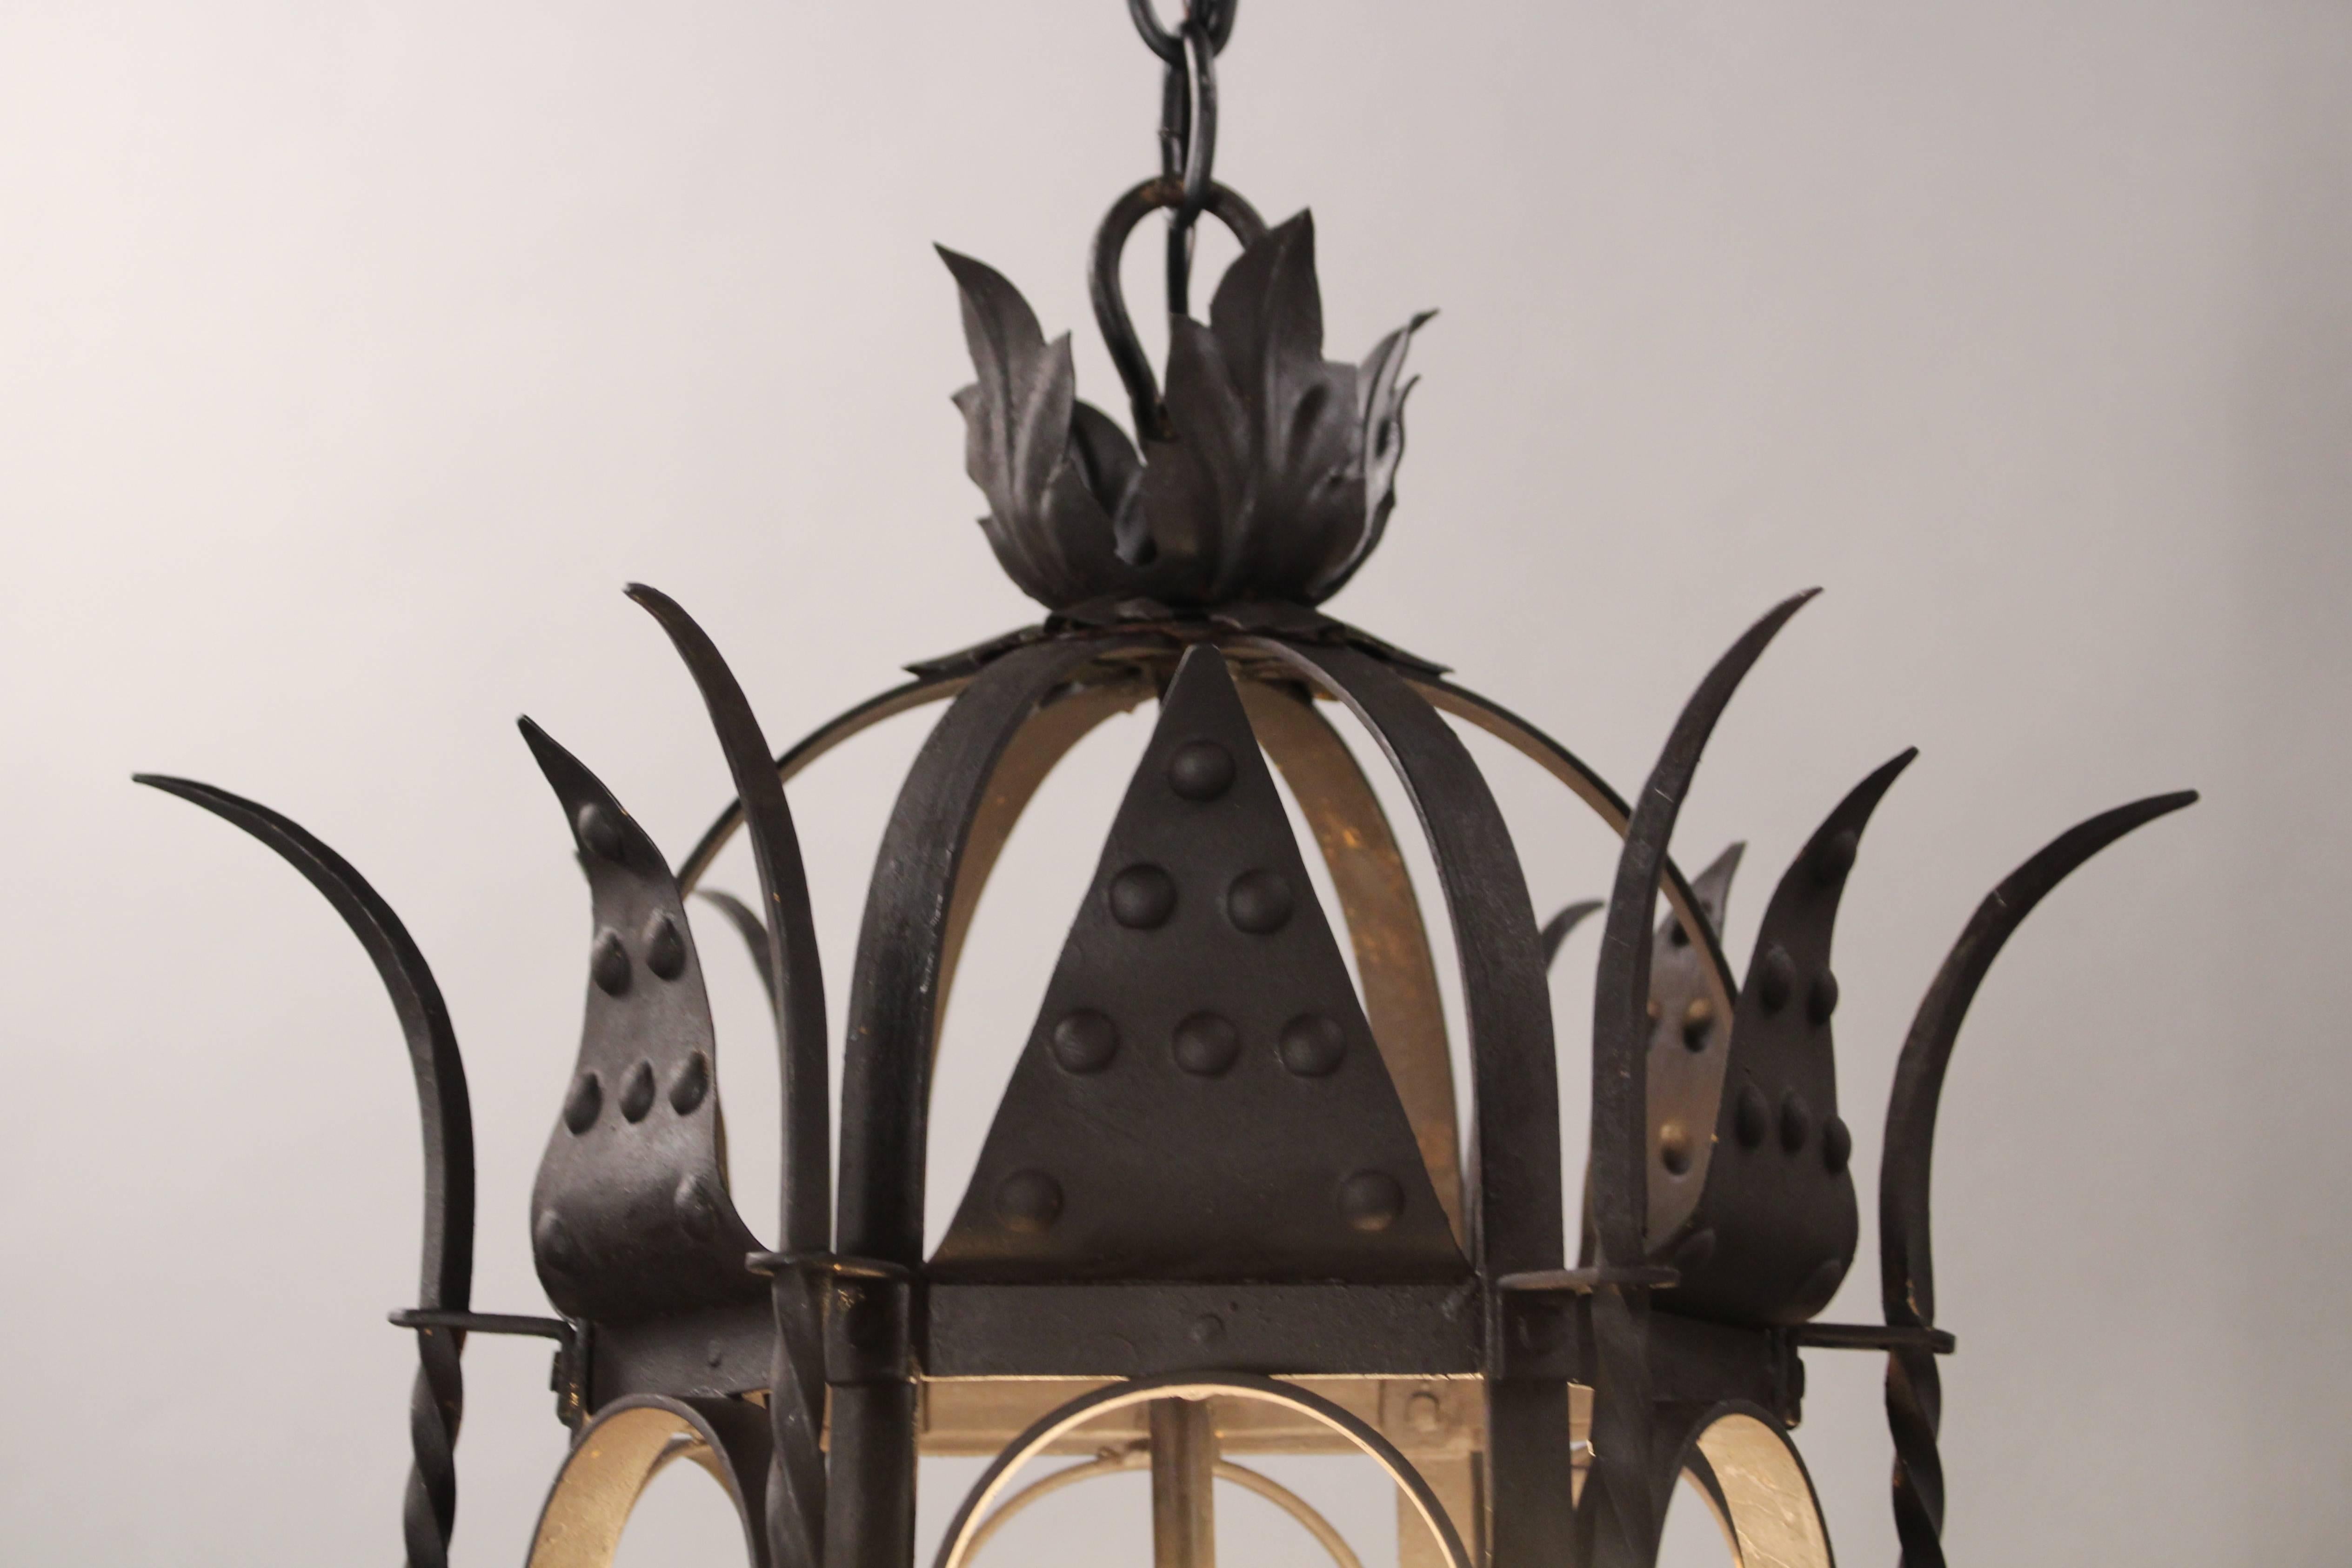 Spanish Colonial Classic 1920s Large-Scale Spanish Revival Chandelier